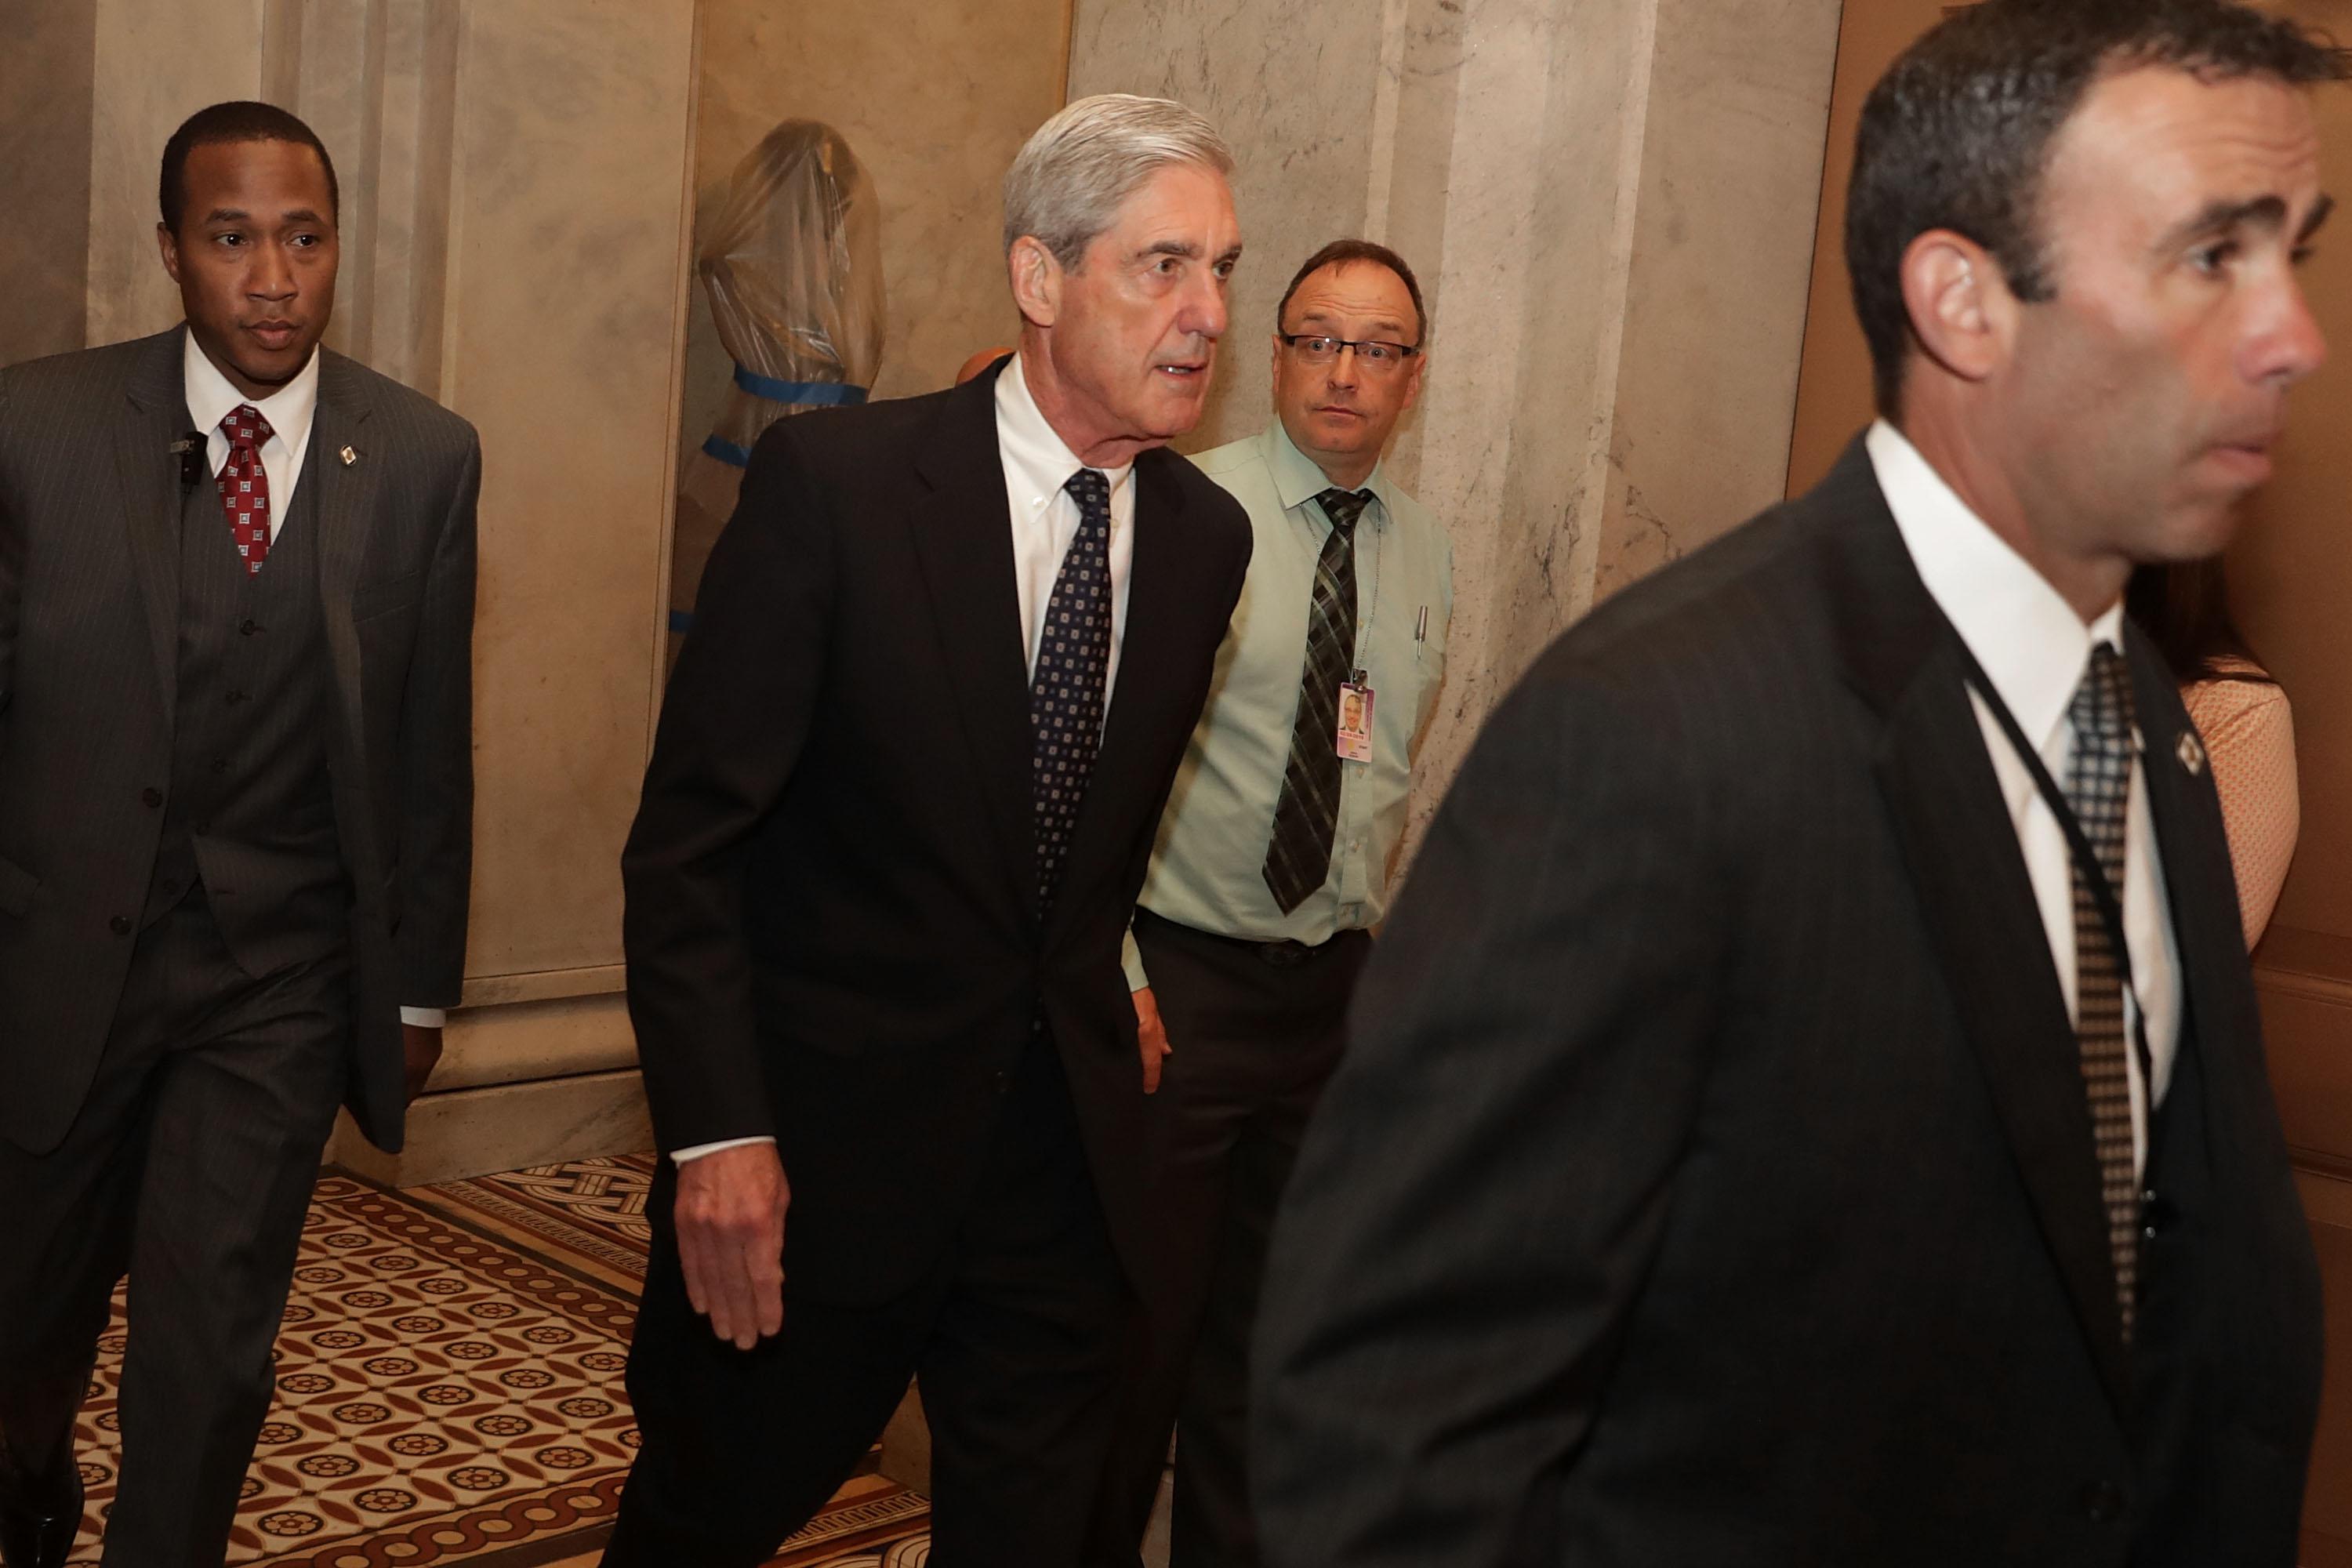 Former FBI Director Robert Mueller, surrounded by security and staff, leaves a meeting with senators at the Capitol on June 21in Washington.